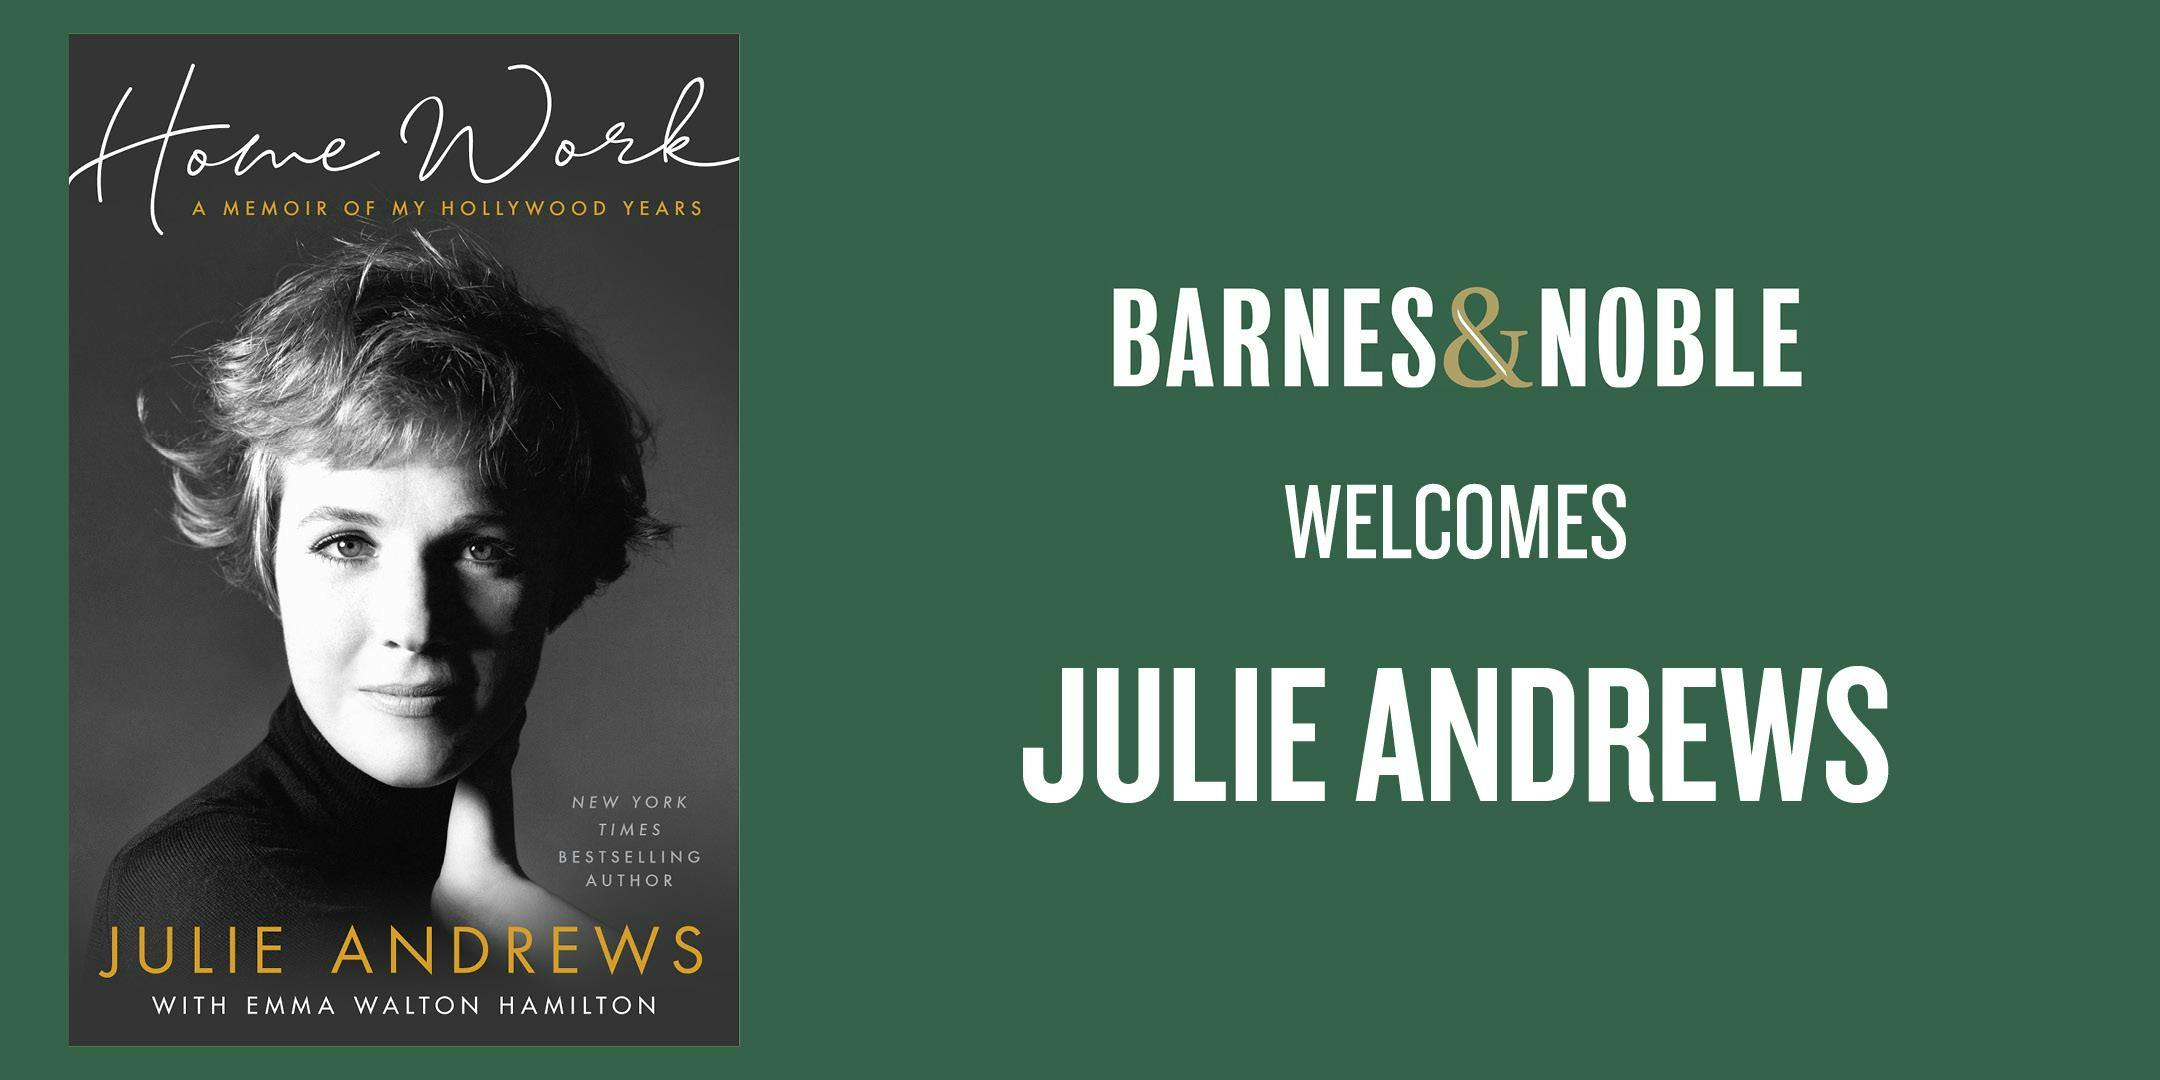 Julie Andrews Discusses HOME WORK at Barnes & Noble - The Grove